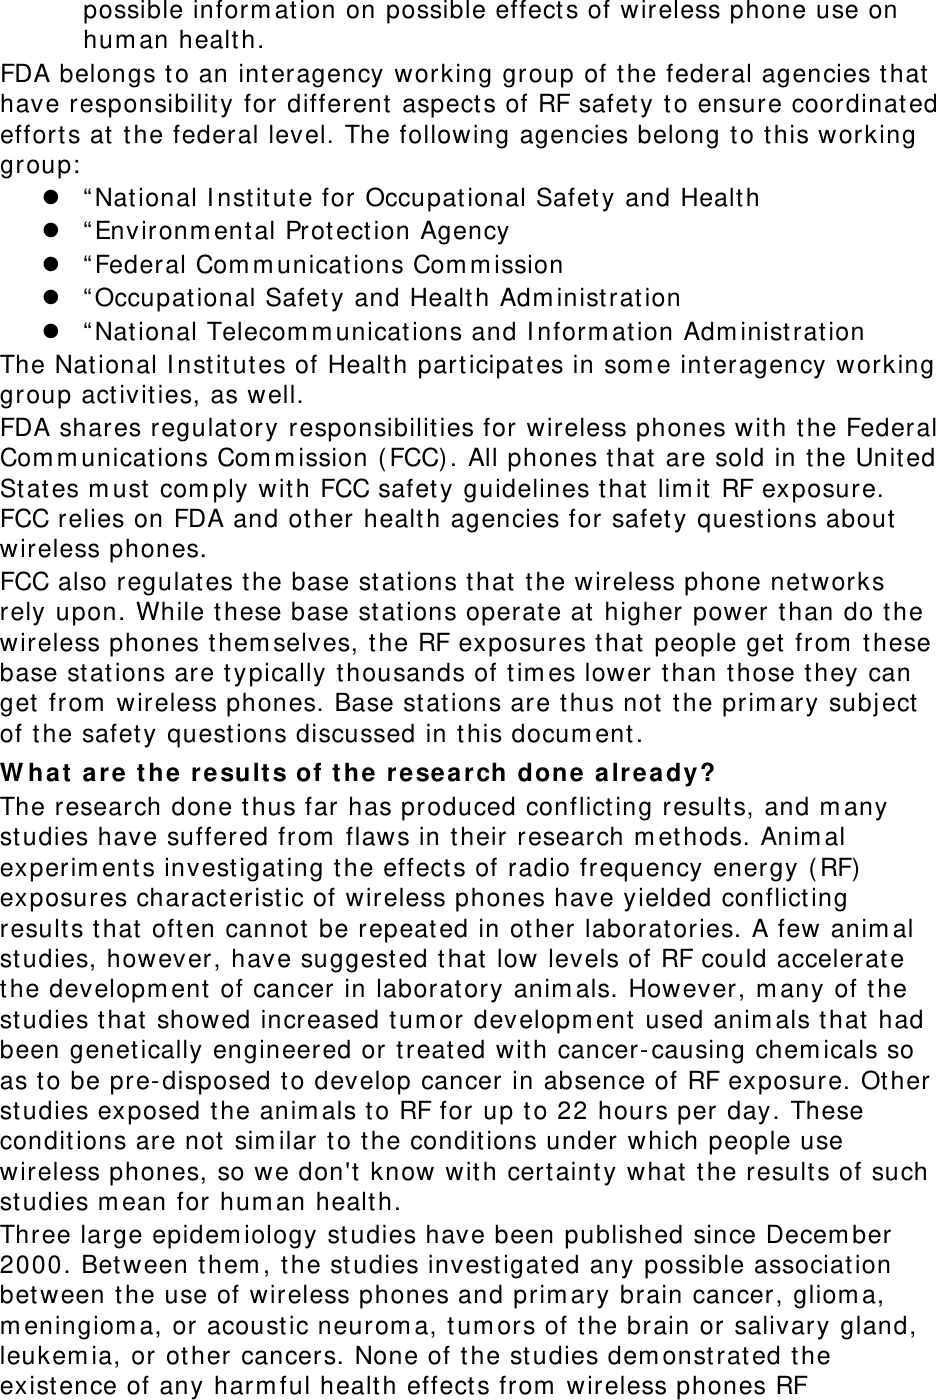 possible inform ation on possible effect s of wireless phone use on hum an healt h. FDA belongs t o an int eragency working group of t he federal agencies t hat  have responsibilit y for different  aspect s of RF safety t o ensure coordinated efforts at t he federal level. The following agencies belong t o this working group:   “ Nat ional I nst itute for Occupat ional Safet y and Healt h  “ Environm ent al Prot ection Agency  “ Federal Com m unicat ions Com m ission  “ Occupat ional Safety and Health Adm inistrat ion  “ Nat ional Telecom m unicat ions and I nform ation Adm inist ration The Nat ional I nst itut es of Health part icipat es in som e int eragency working group act ivities, as well. FDA shares regulatory responsibilit ies for wireless phones wit h the Federal Com m unicat ions Com m ission ( FCC) . All phones t hat  are sold in t he Unit ed St at es m ust  com ply wit h FCC safety guidelines that  lim it  RF exposure. FCC relies on FDA and ot her healt h agencies for safety questions about  wireless phones. FCC also regulates the base stat ions t hat  t he wireless phone net works rely upon. While t hese base st ations operat e at  higher power than do t he wireless phones them selves, t he RF exposures t hat  people get  from  t hese base stat ions are t ypically thousands of t im es lower than those they can get  from  wireless phones. Base st at ions are t hus not the prim ary subj ect of the safet y quest ions discussed in t his docum ent . W hat  a r e  t h e  results of t h e  rese a r ch done alr e a dy? The research done t hus far has produced conflict ing results, and m any studies have suffered from  flaws in t heir research m et hods. Anim al experim ents invest igat ing t he effect s of radio frequency energy (RF)  exposures charact eristic of wireless phones have yielded conflict ing result s t hat  often cannot be repeat ed in ot her laborat ories. A few anim al studies, however, have suggested t hat low levels of RF could accelerat e the developm ent  of cancer in laborat ory anim als. However, m any of t he studies t hat  showed increased tum or developm ent used anim als t hat  had been genet ically engineered or t reated with cancer-causing chem icals so as t o be pre- disposed t o develop cancer in absence of RF exposure. Other studies exposed t he anim als t o RF for up to 22 hours per day. These conditions are not  sim ilar t o the condit ions under which people use wireless phones, so we don&apos;t  know wit h certaint y what  t he result s of such studies m ean for hum an health. Three large epidem iology st udies have been published since Decem ber 2000. Bet ween them , t he st udies investigated any possible associat ion bet ween t he use of wireless phones and prim ary brain cancer, gliom a, m eningiom a, or acoust ic neurom a, t um ors of t he brain or salivary gland, leukem ia, or other cancers. None of t he studies dem onst rat ed t he existence of any harm ful health effect s from  wireless phones RF 